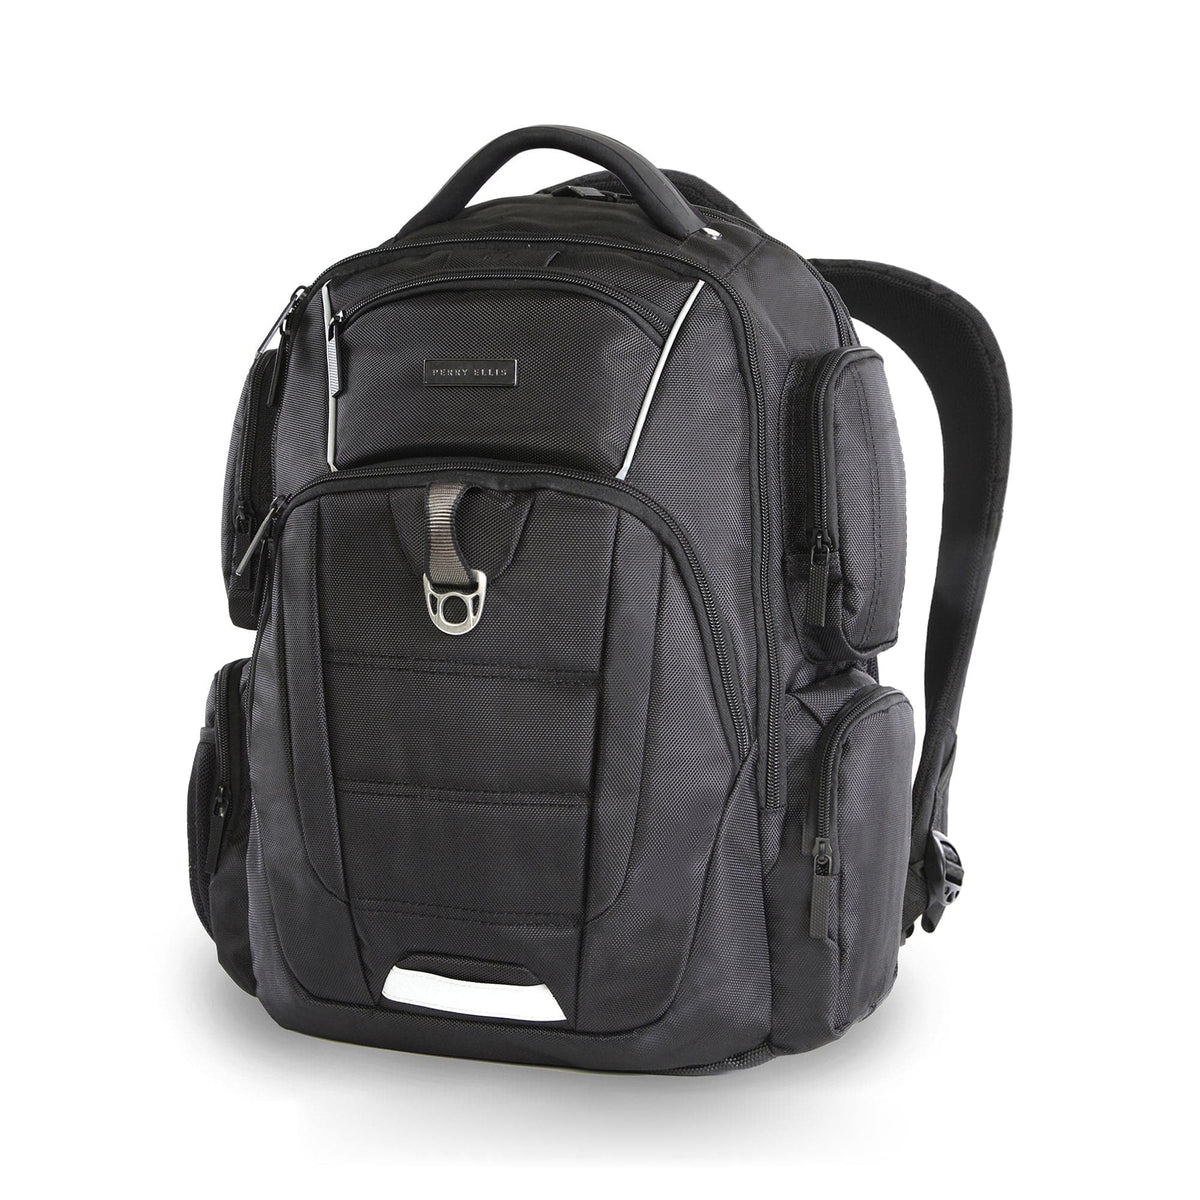 Perry Ellis M350 Executive Collection Business Laptop Backpack